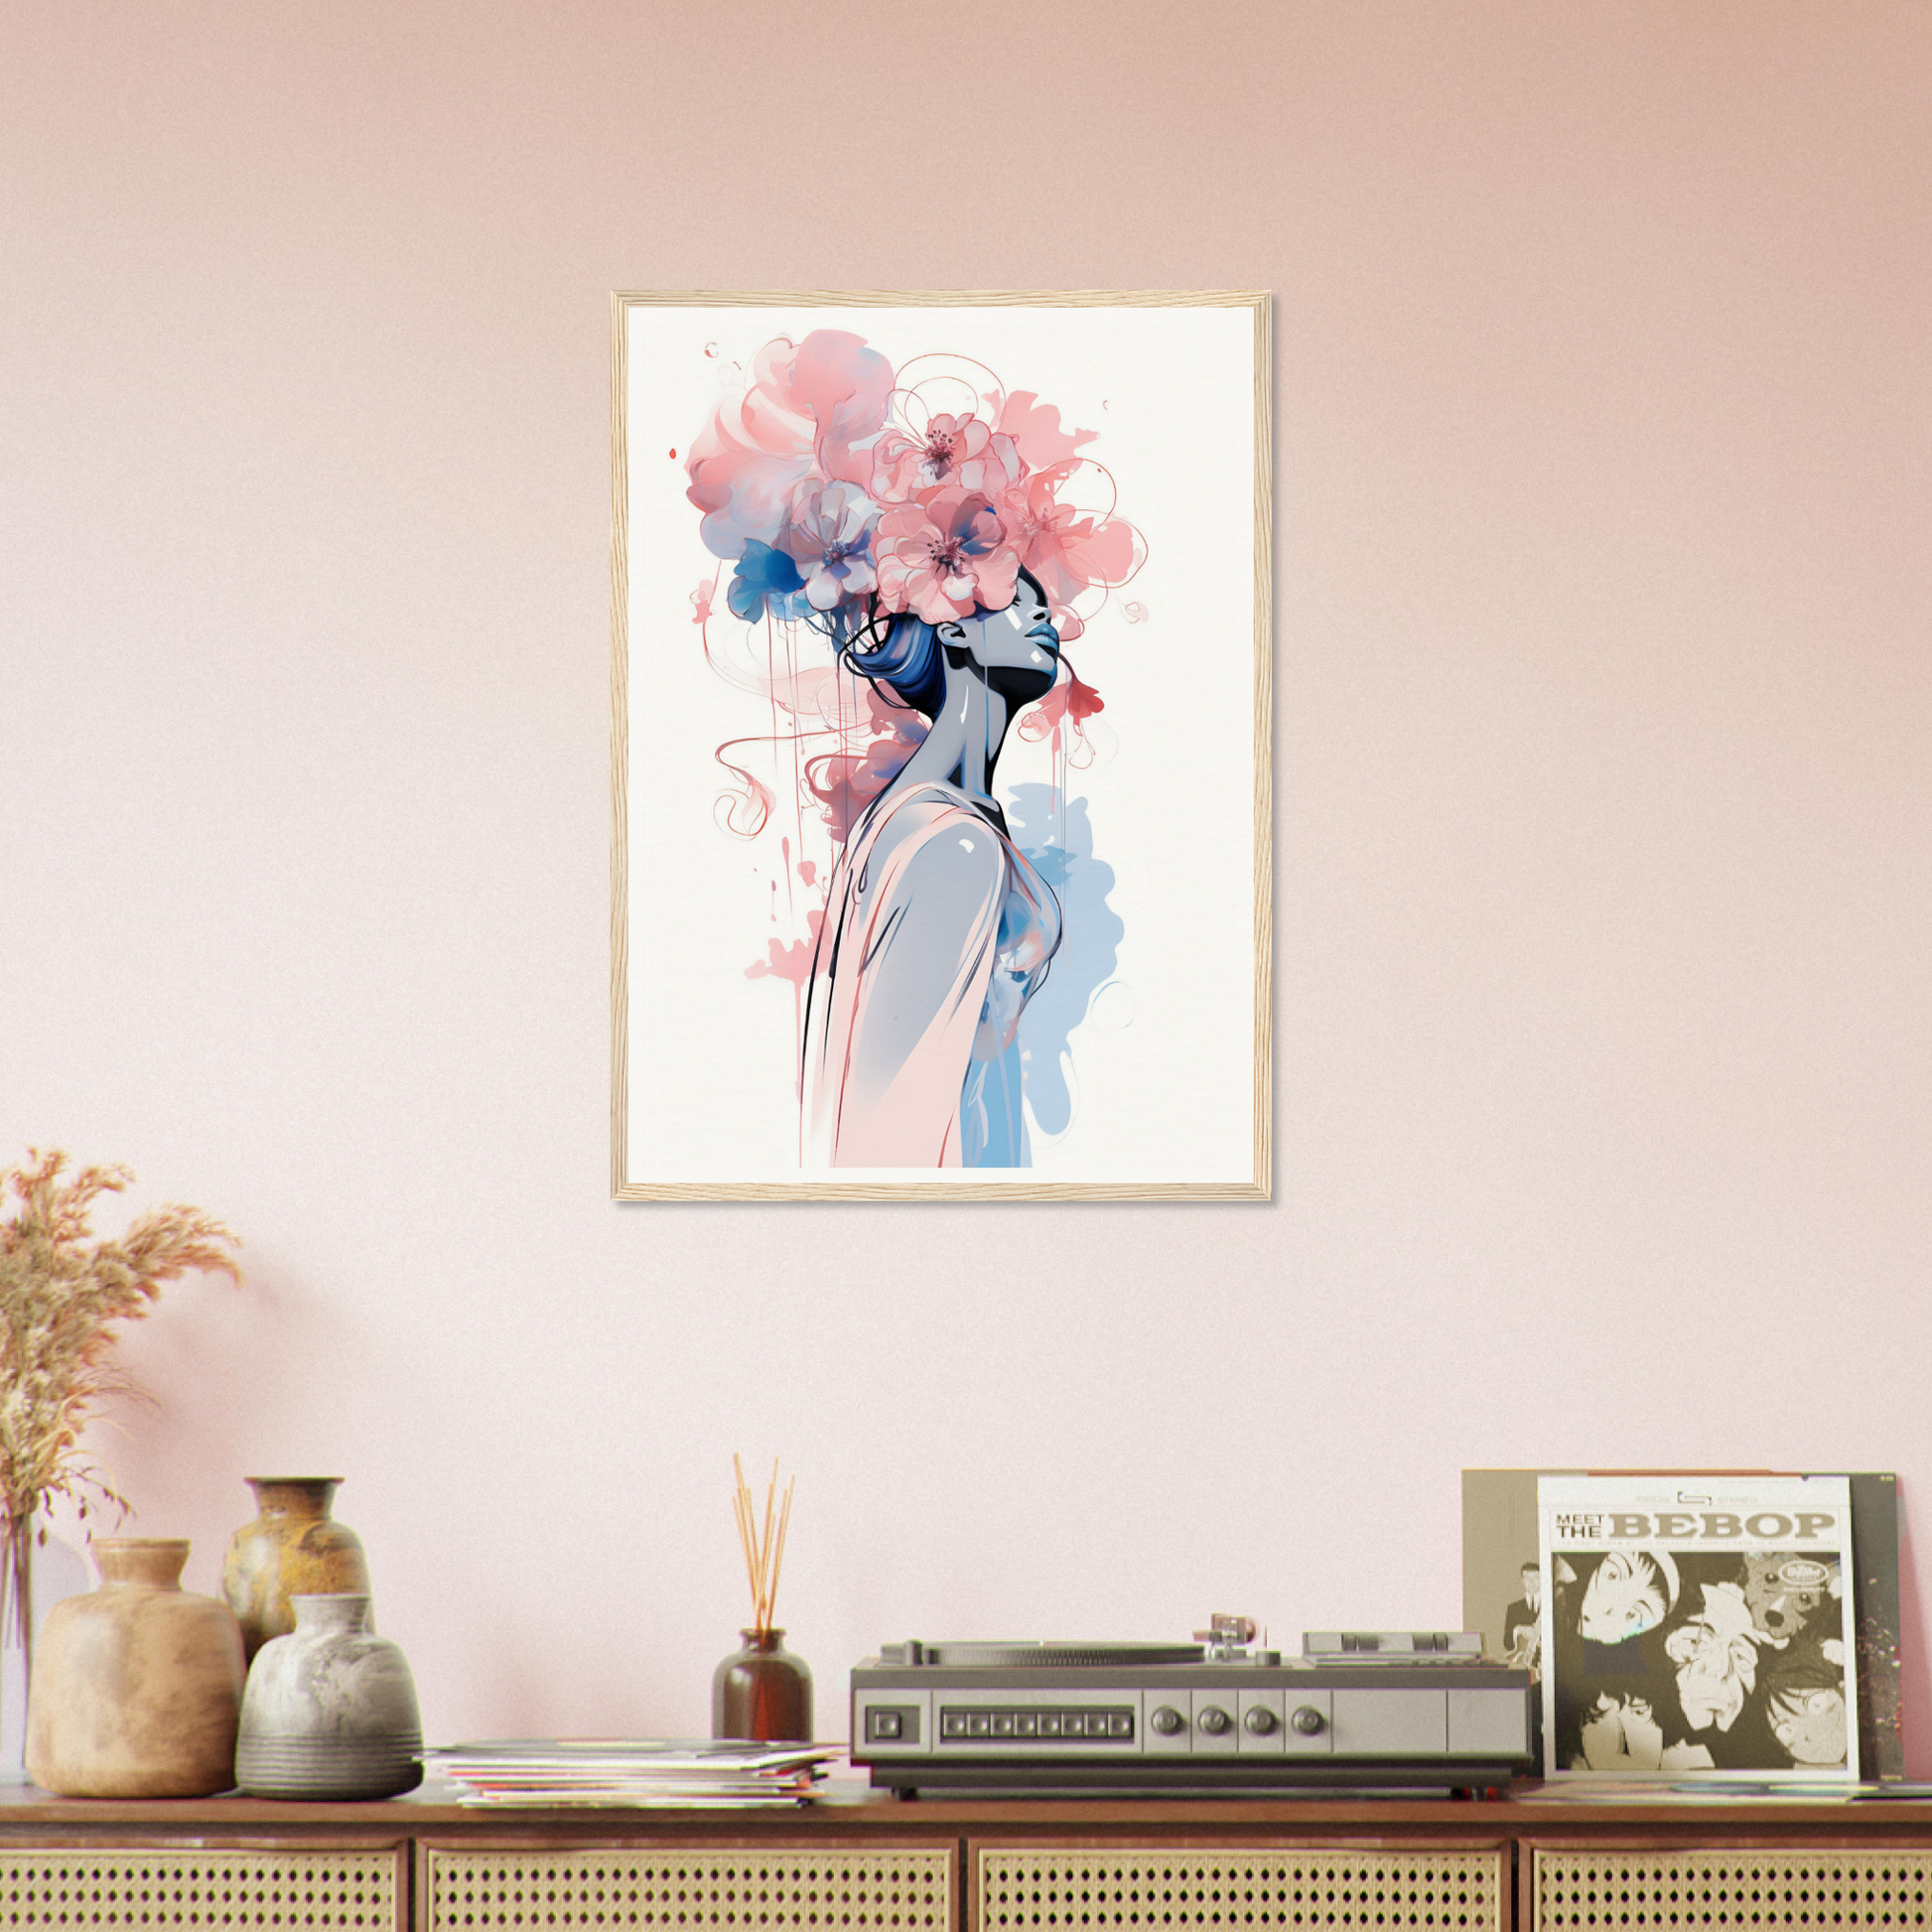 An illustration of a woman with flowers on her head, perfect for the Feminine Frames The Oracle Windows™ Collection poster on my wall.